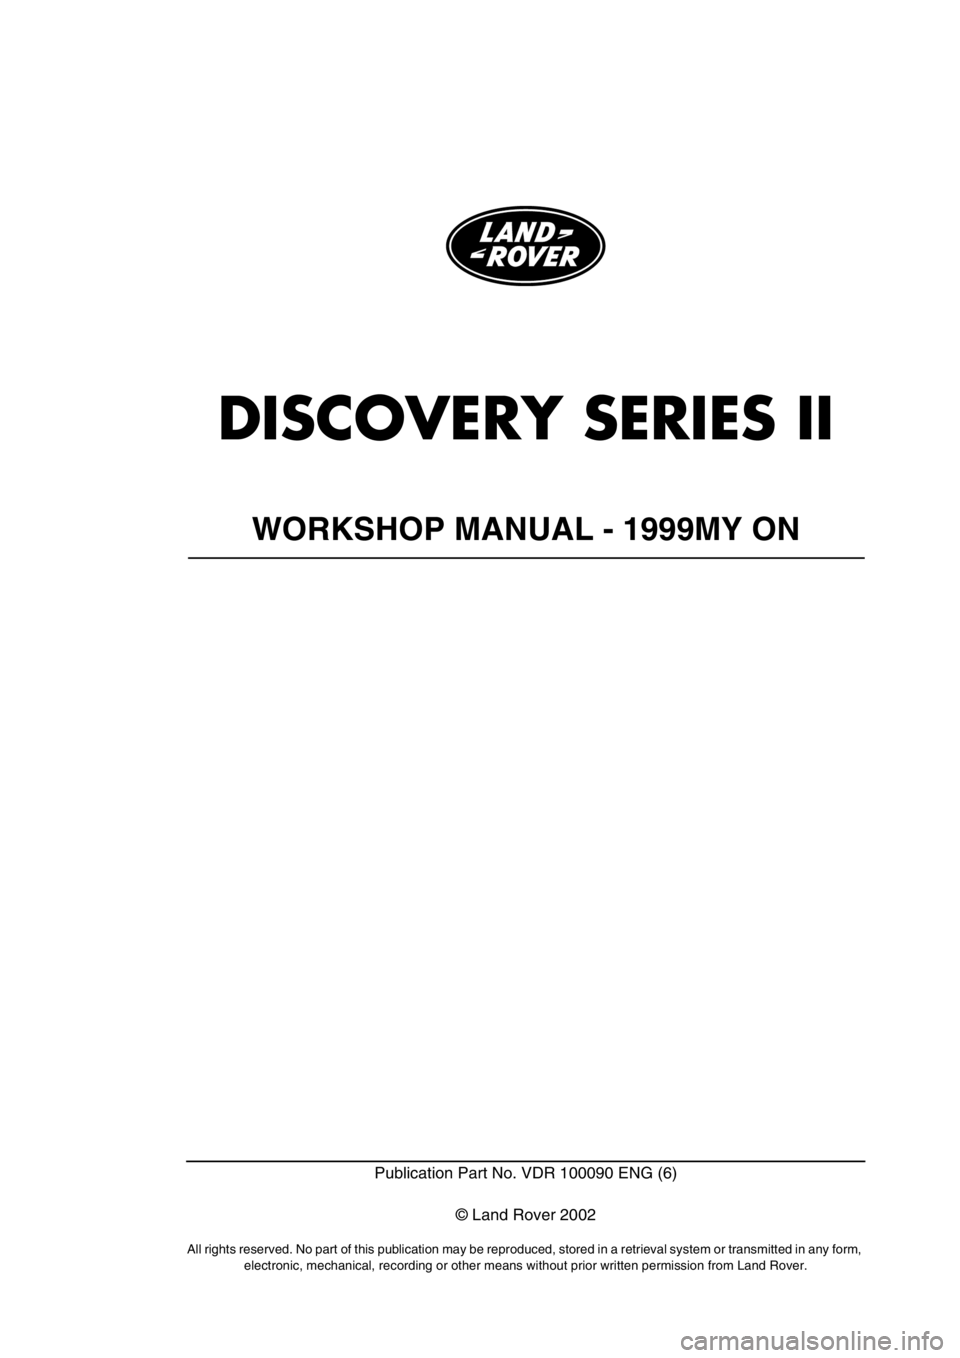 LAND ROVER DISCOVERY 2002  Workshop Manual DISCOVERY SERIES II
WORKSHOP MANUAL - 1999MY ON
Publication Part No. VDR 100090 ENG (6)
© Land Rover 2002
All rights reserved. No part of this publication may be reproduced, stored in a retrieval sys